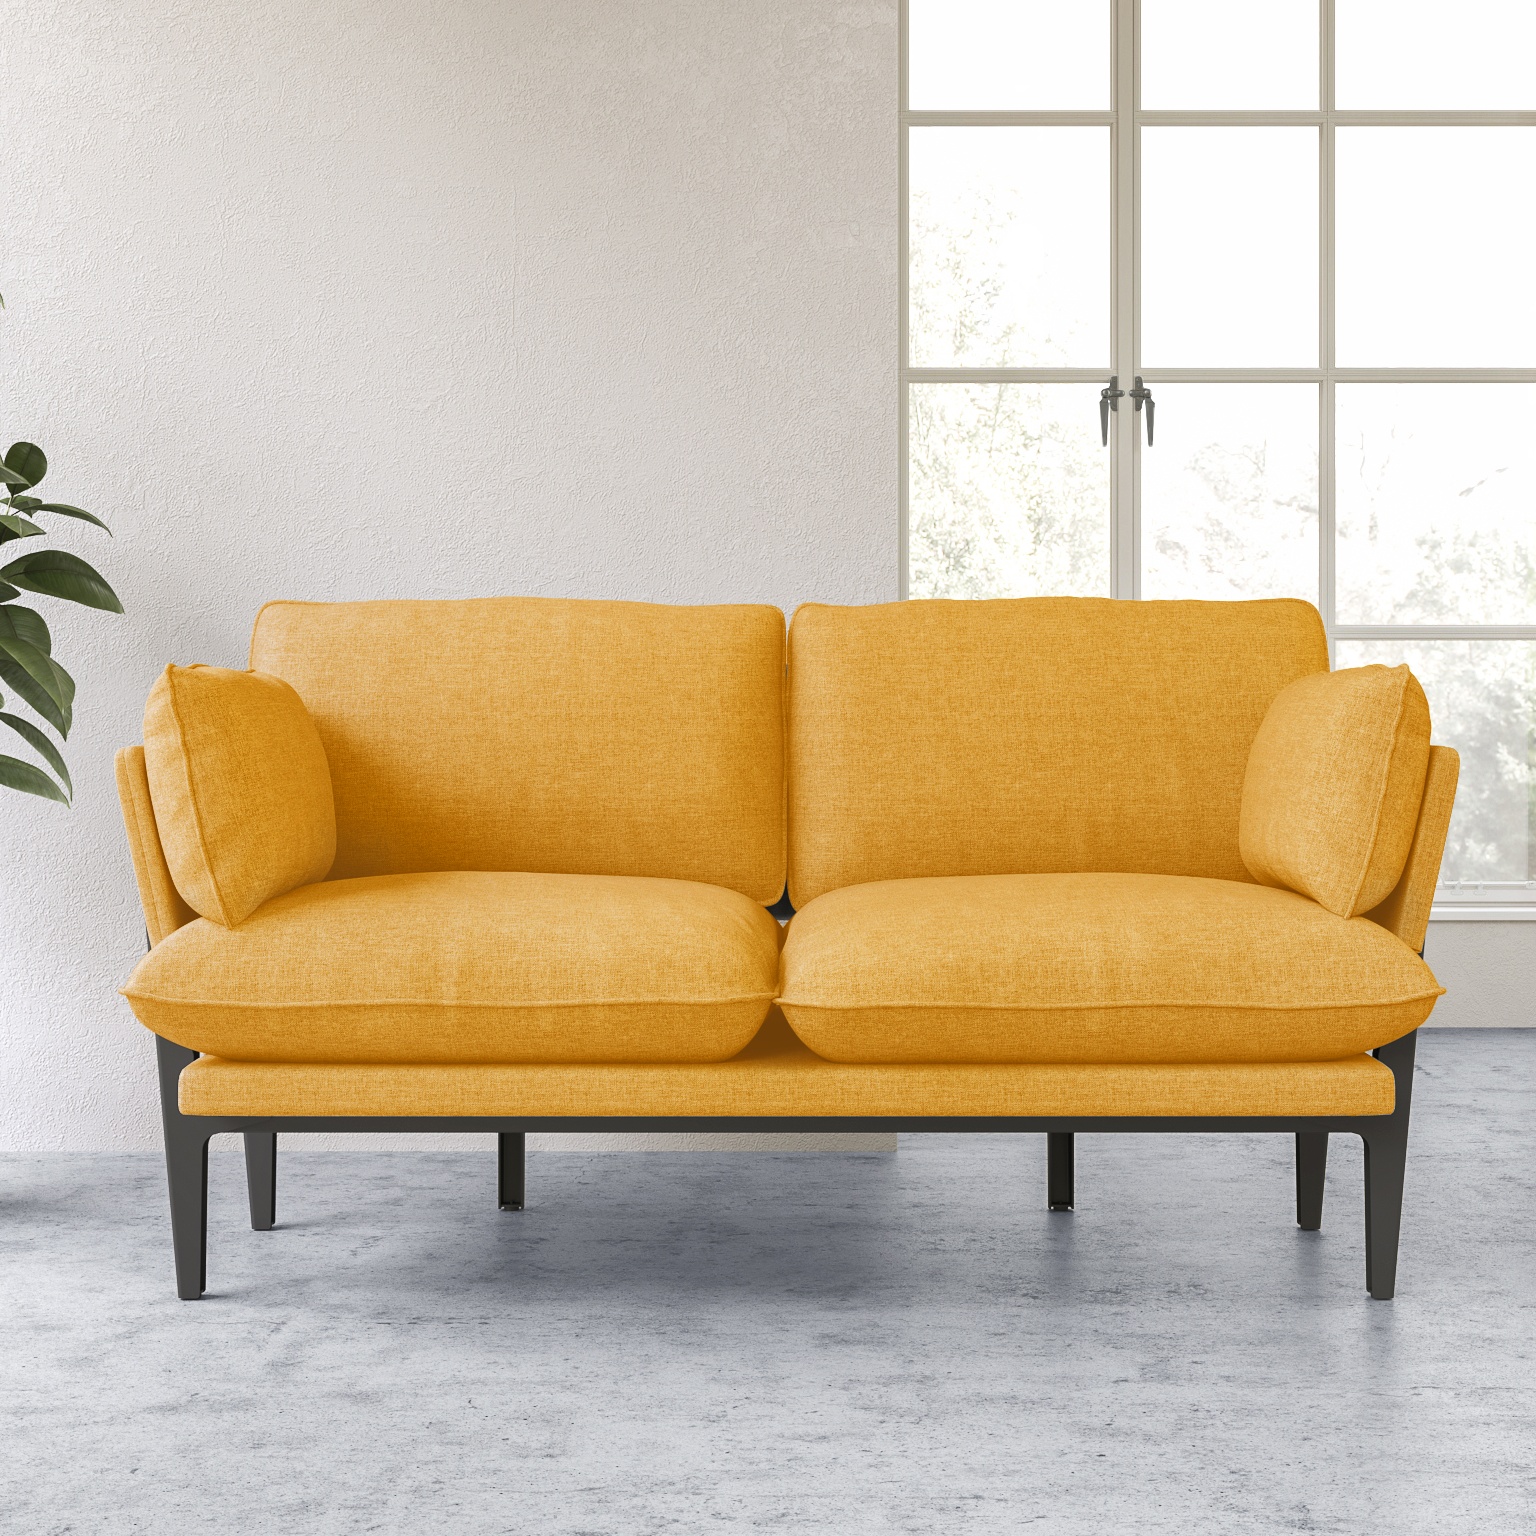 The Floyd Sofa, 2 Seater, Yellow, Upholstered | Modern Sofas